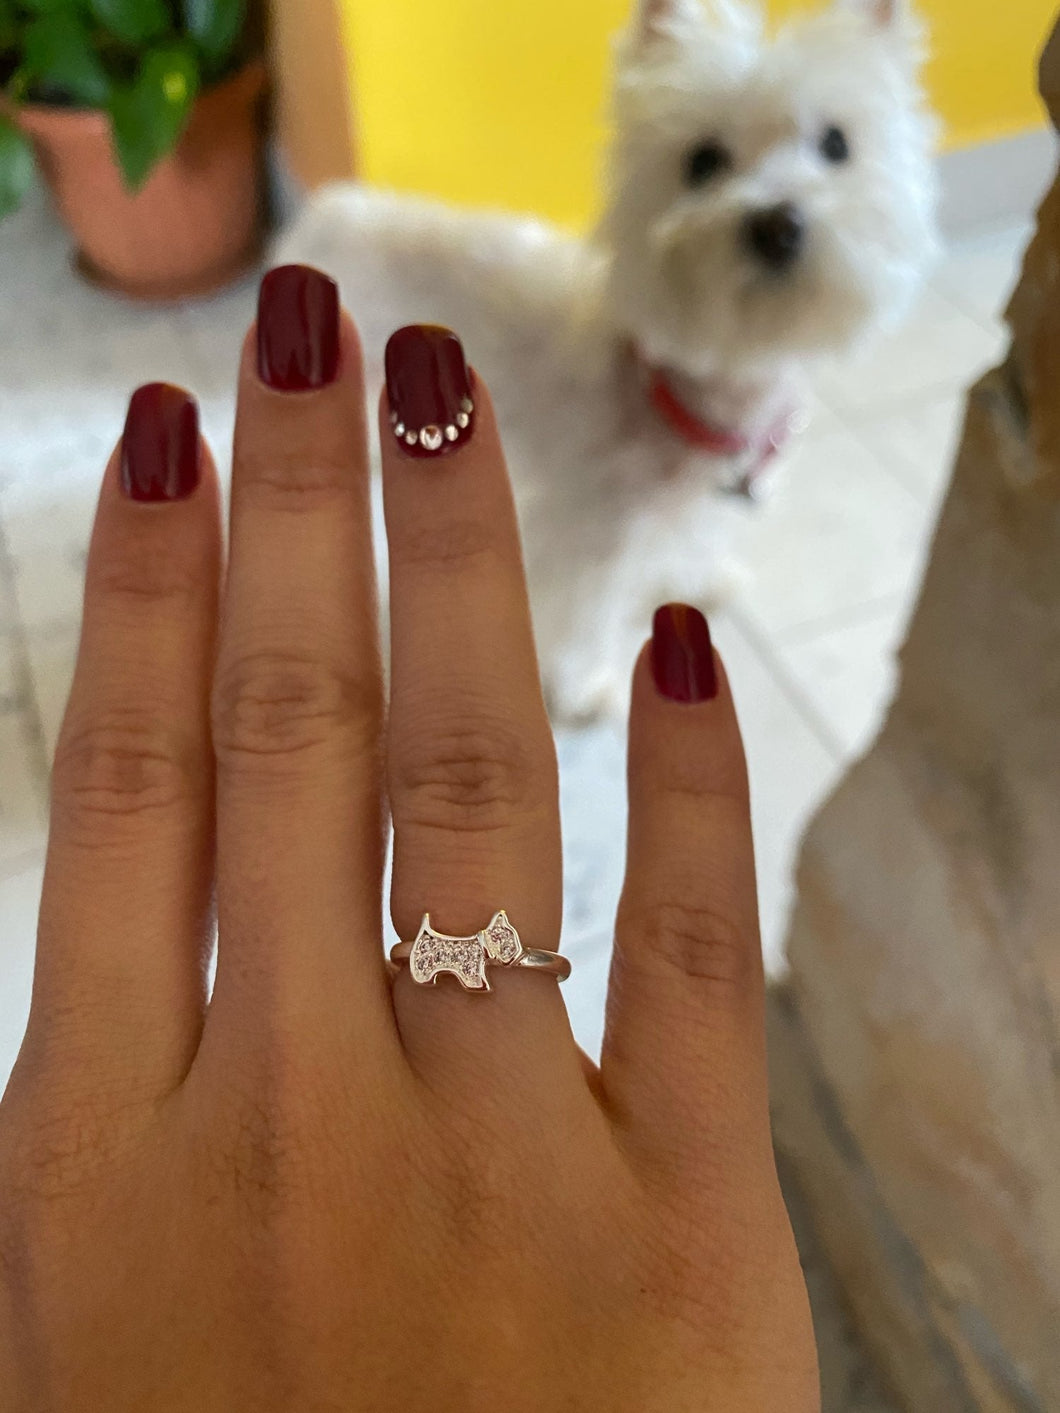 Image of a lady wearing silver Scottie dog ring in sparkling white-stone studded Scottish Terrier design flaunting in front of her dog